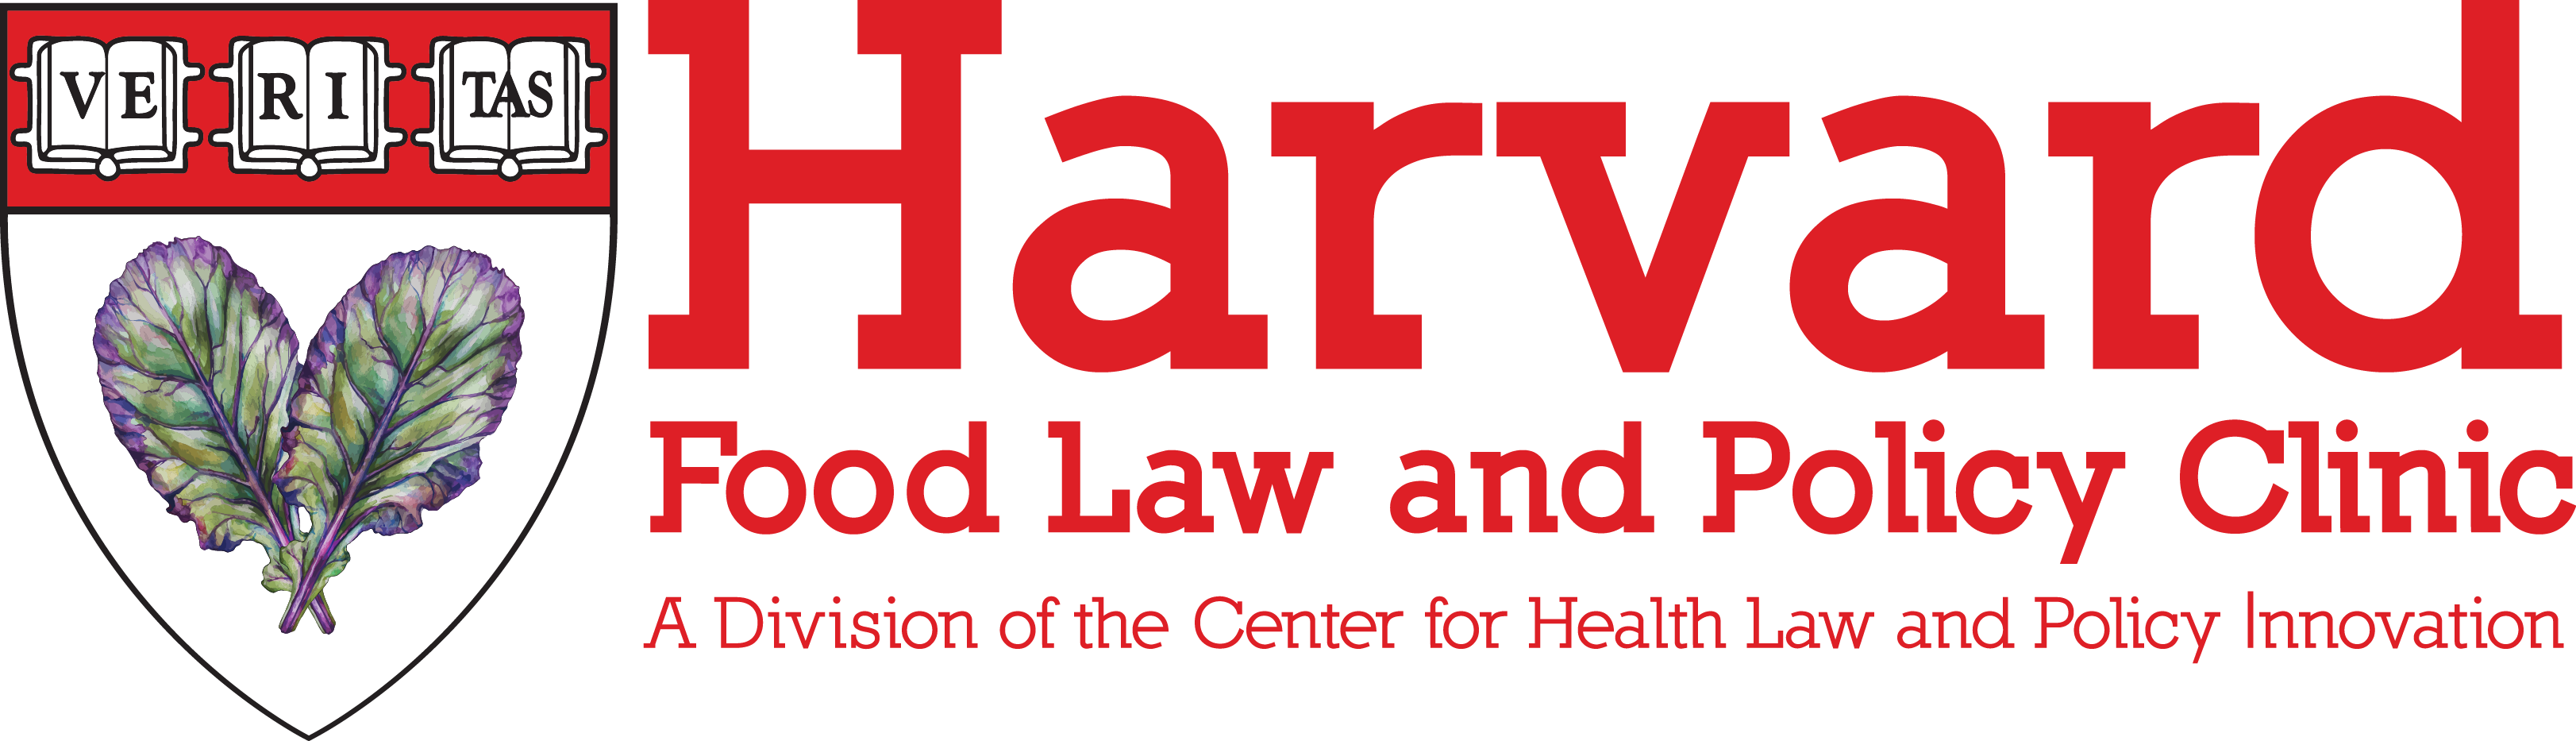 Harvard Law School Food Law and Policy Clinic_logo